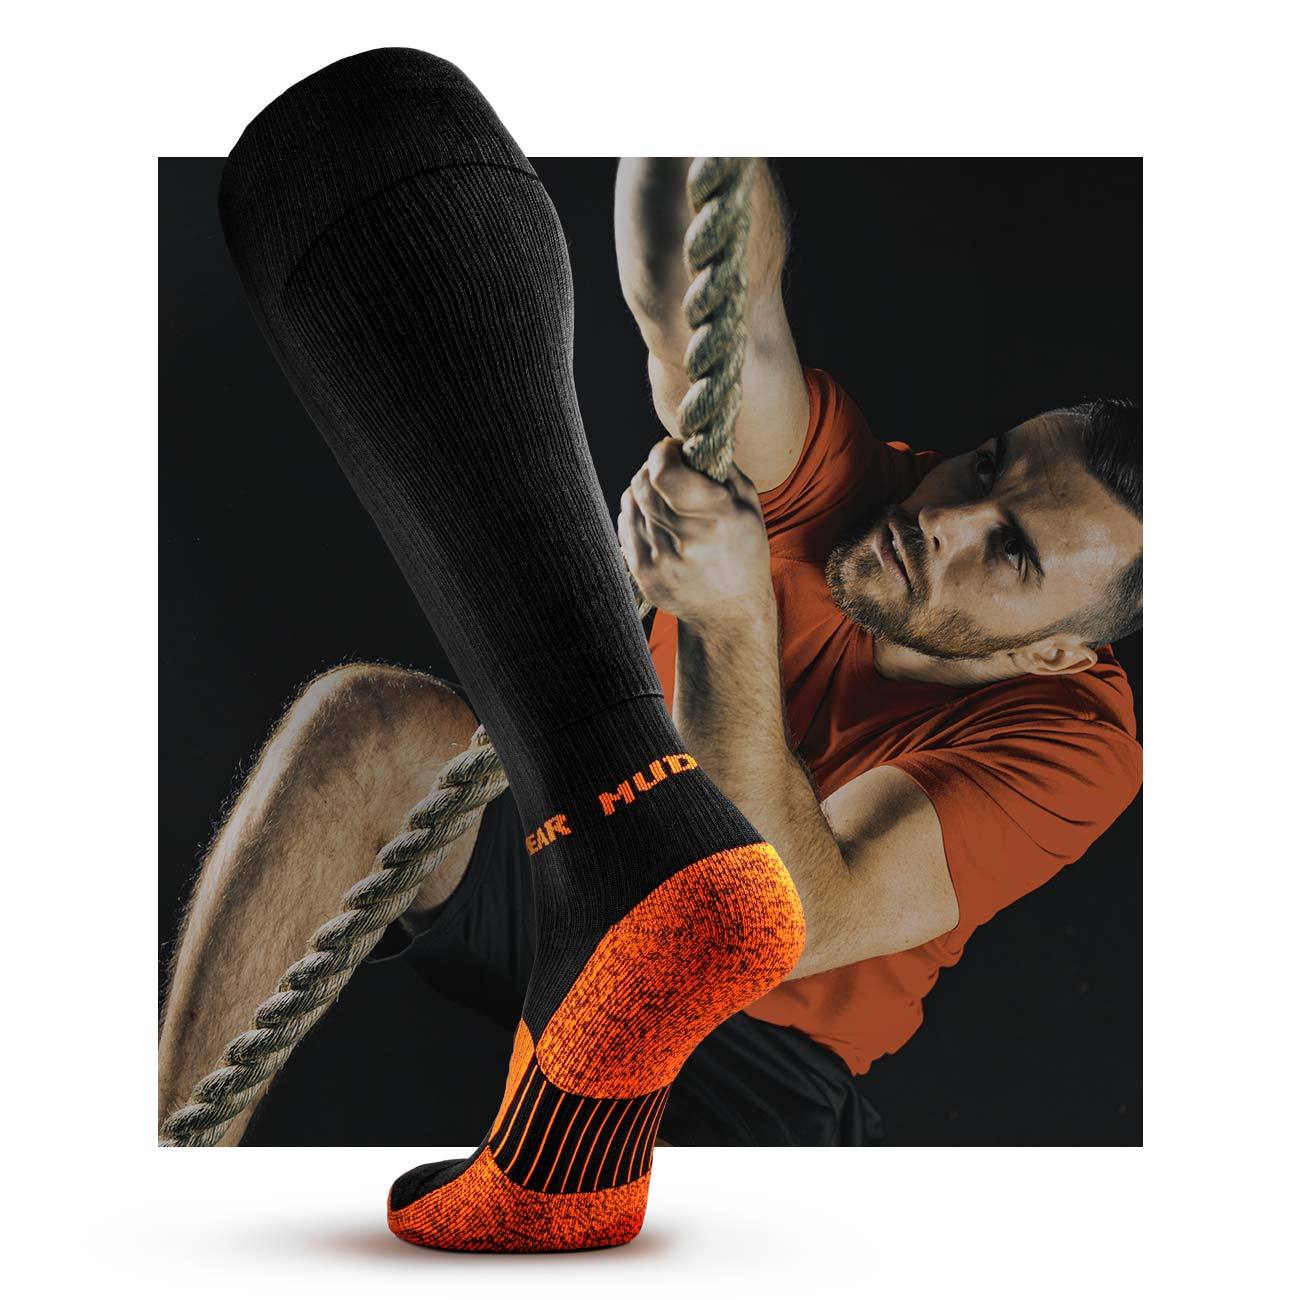 Nike Victory Compression - DOUBLED-UP - Sports Zone Aruba